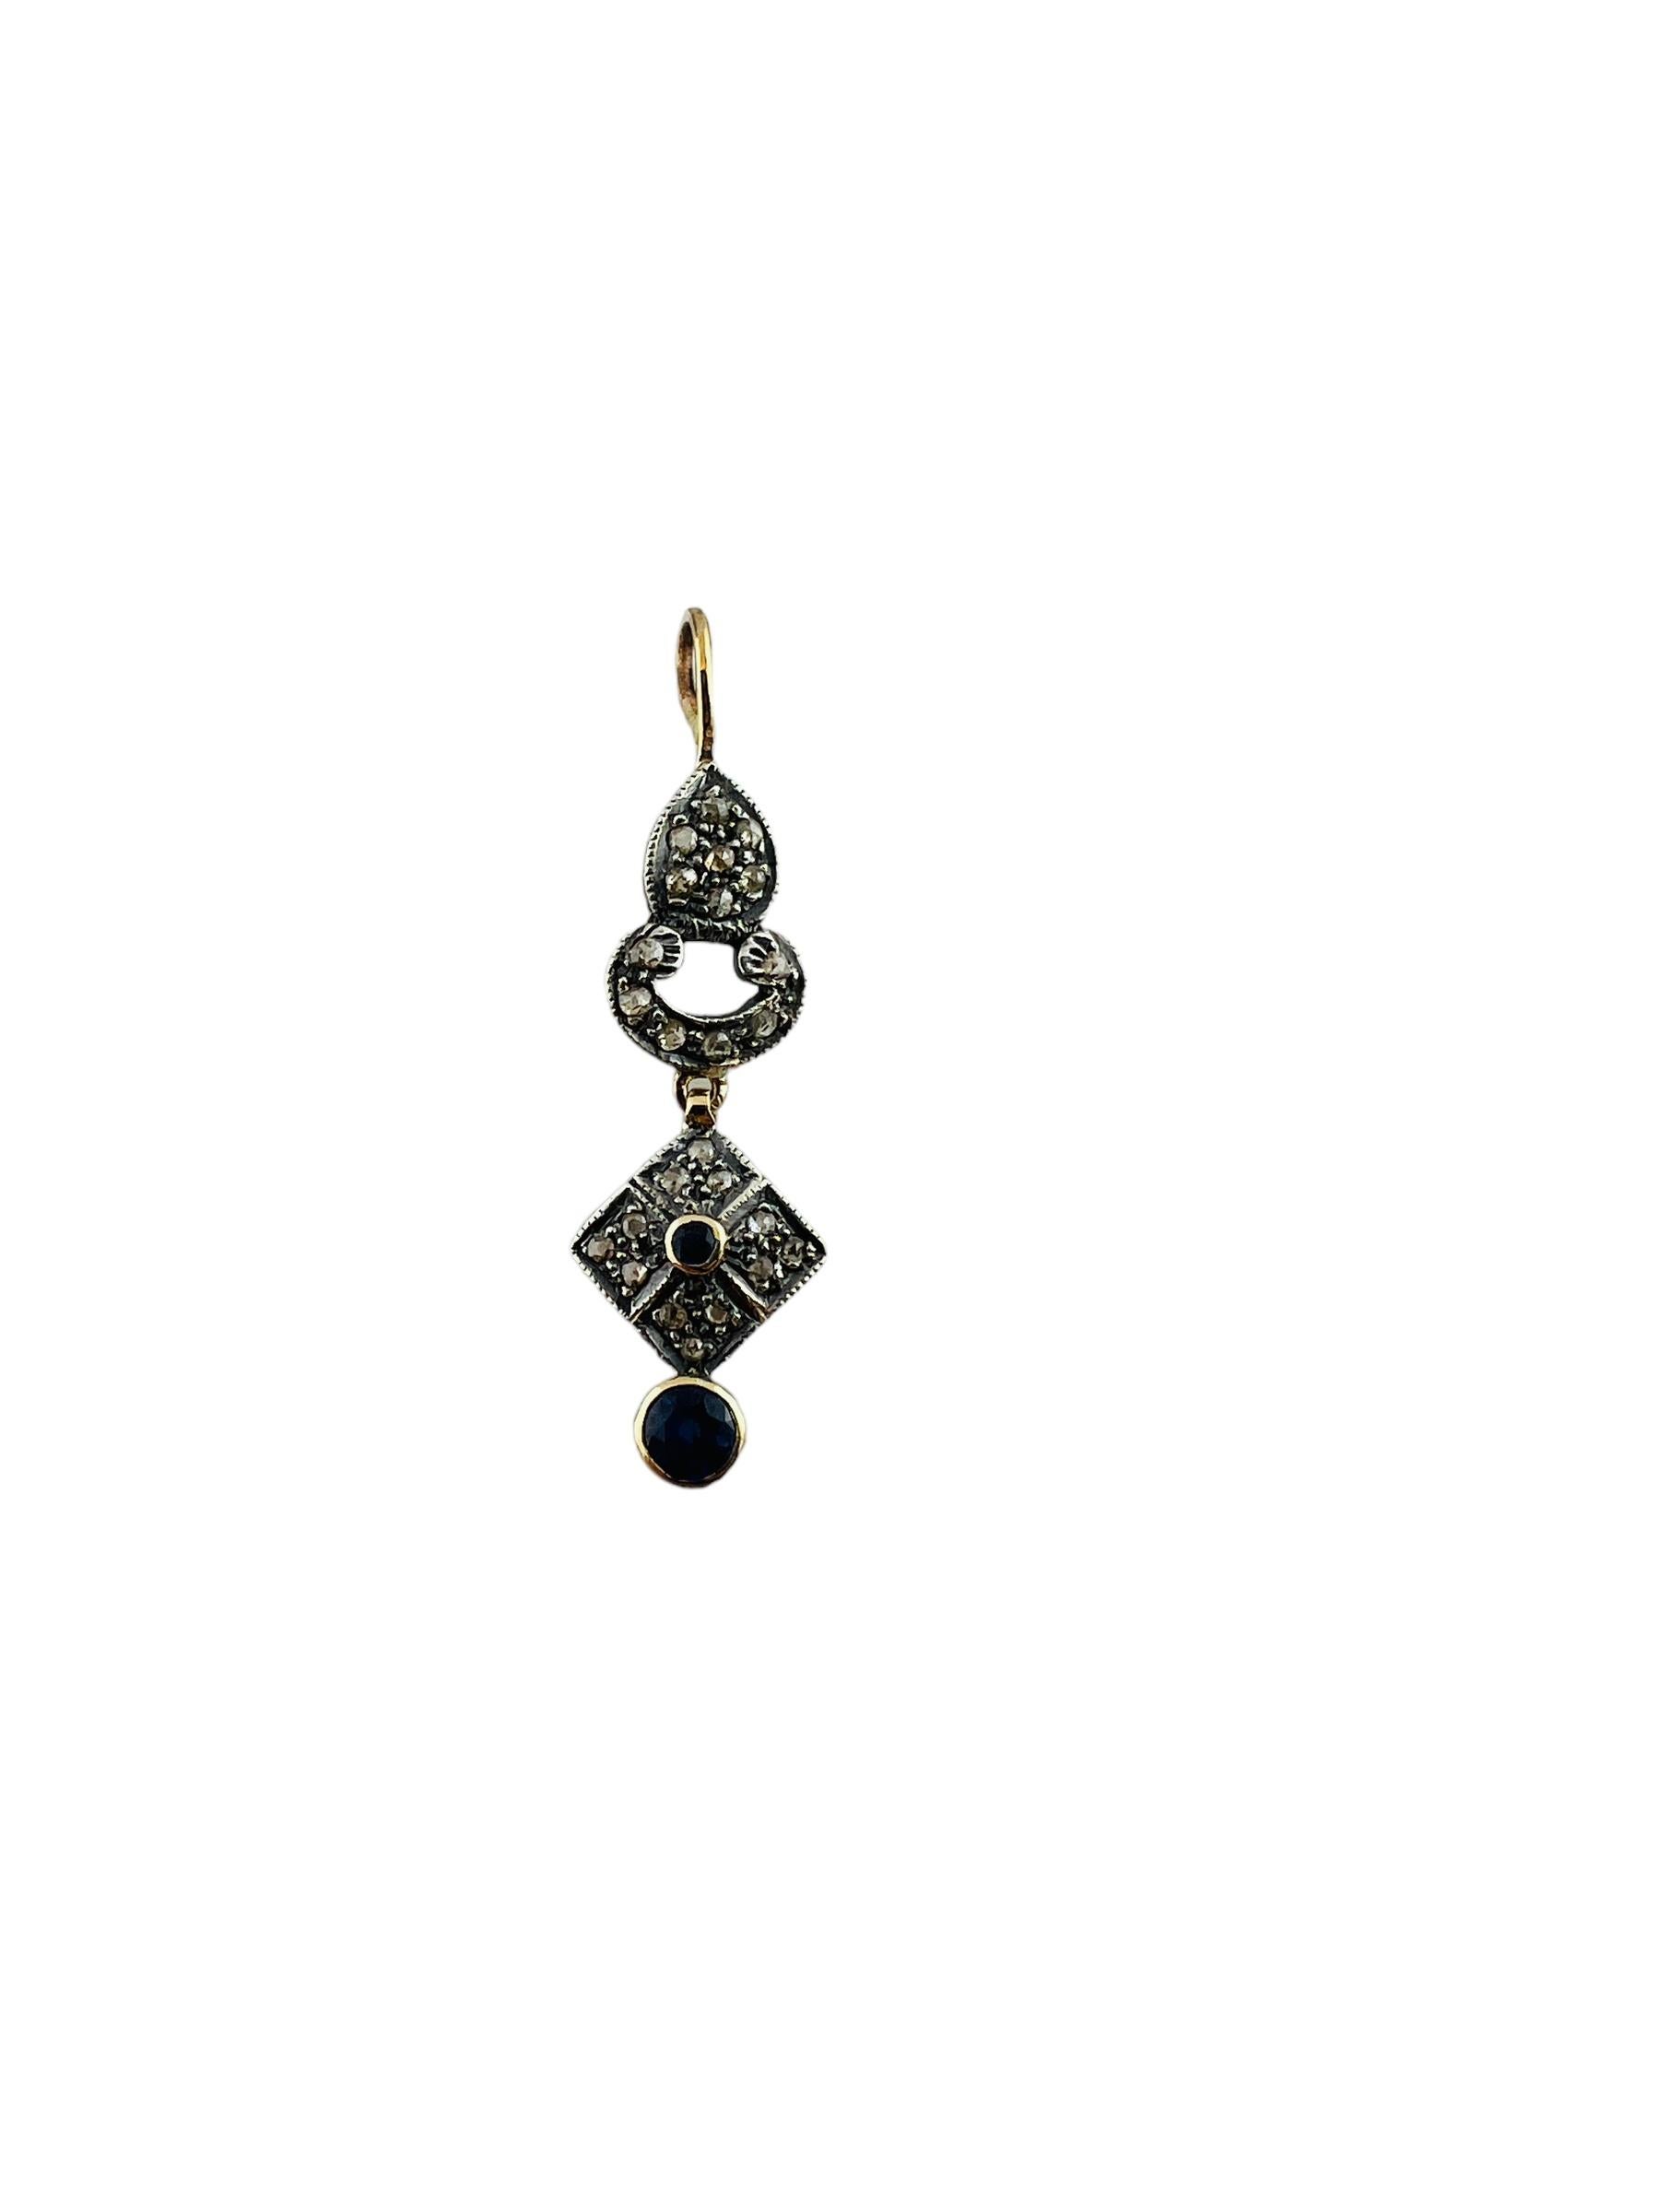 This delicate dangling pendant is set in 14K yellow gold with silver on top ( as was common for its time period)

The pendant is set with 25 rose cut diamonds of SI1-I1 clarity and I color

Pendant also has 2 bezel set synthetic faceted blue